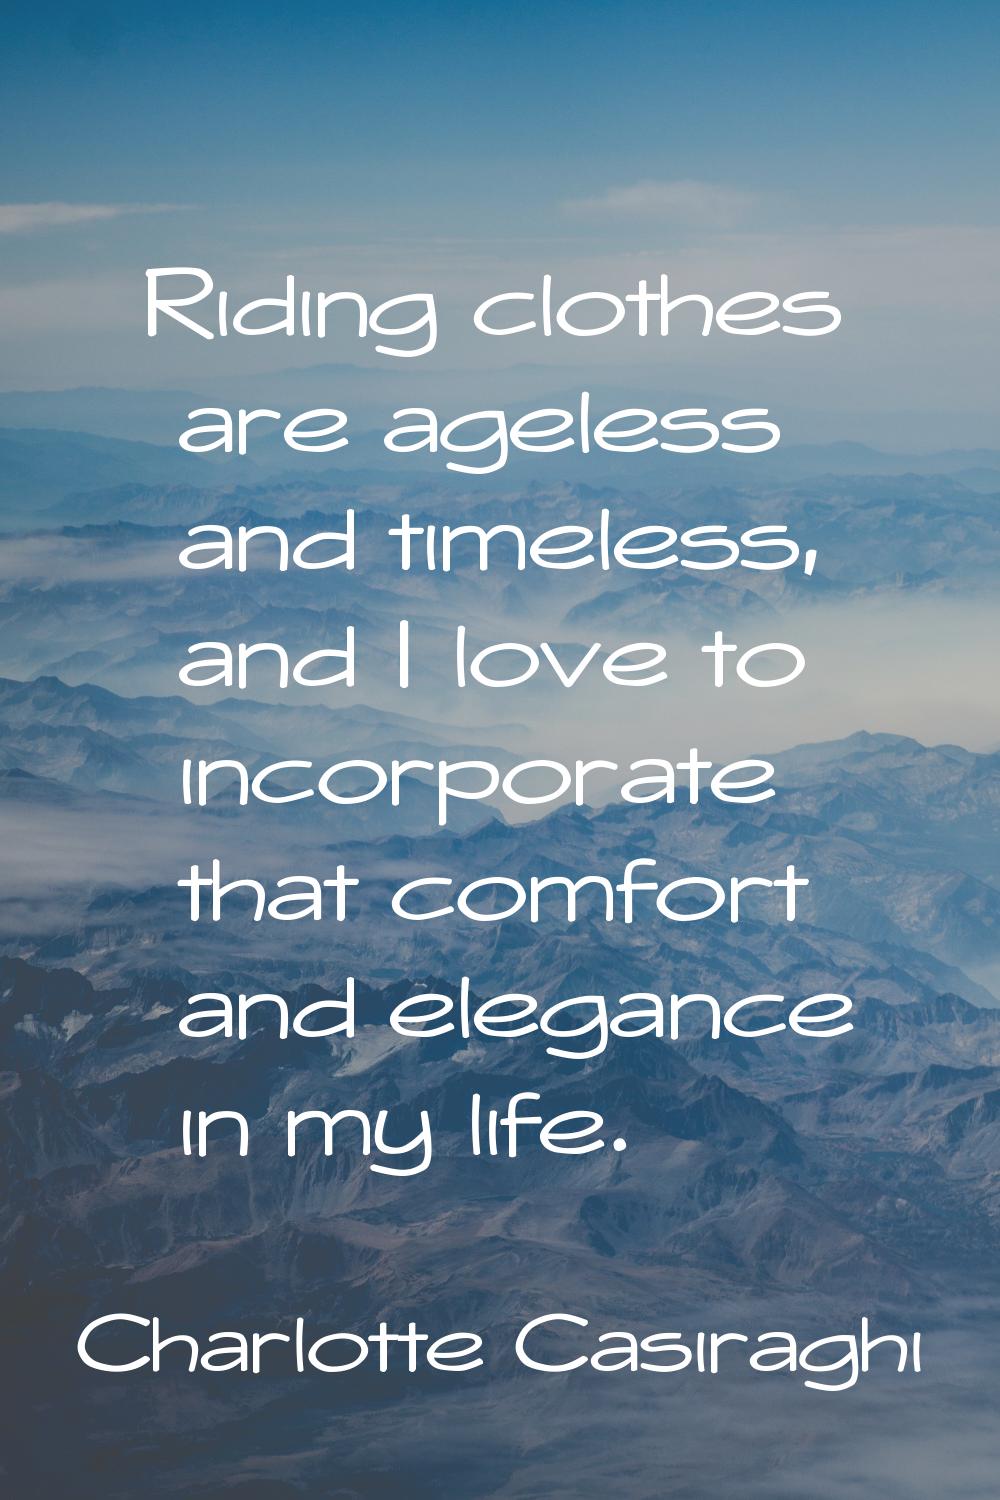 Riding clothes are ageless and timeless, and I love to incorporate that comfort and elegance in my 